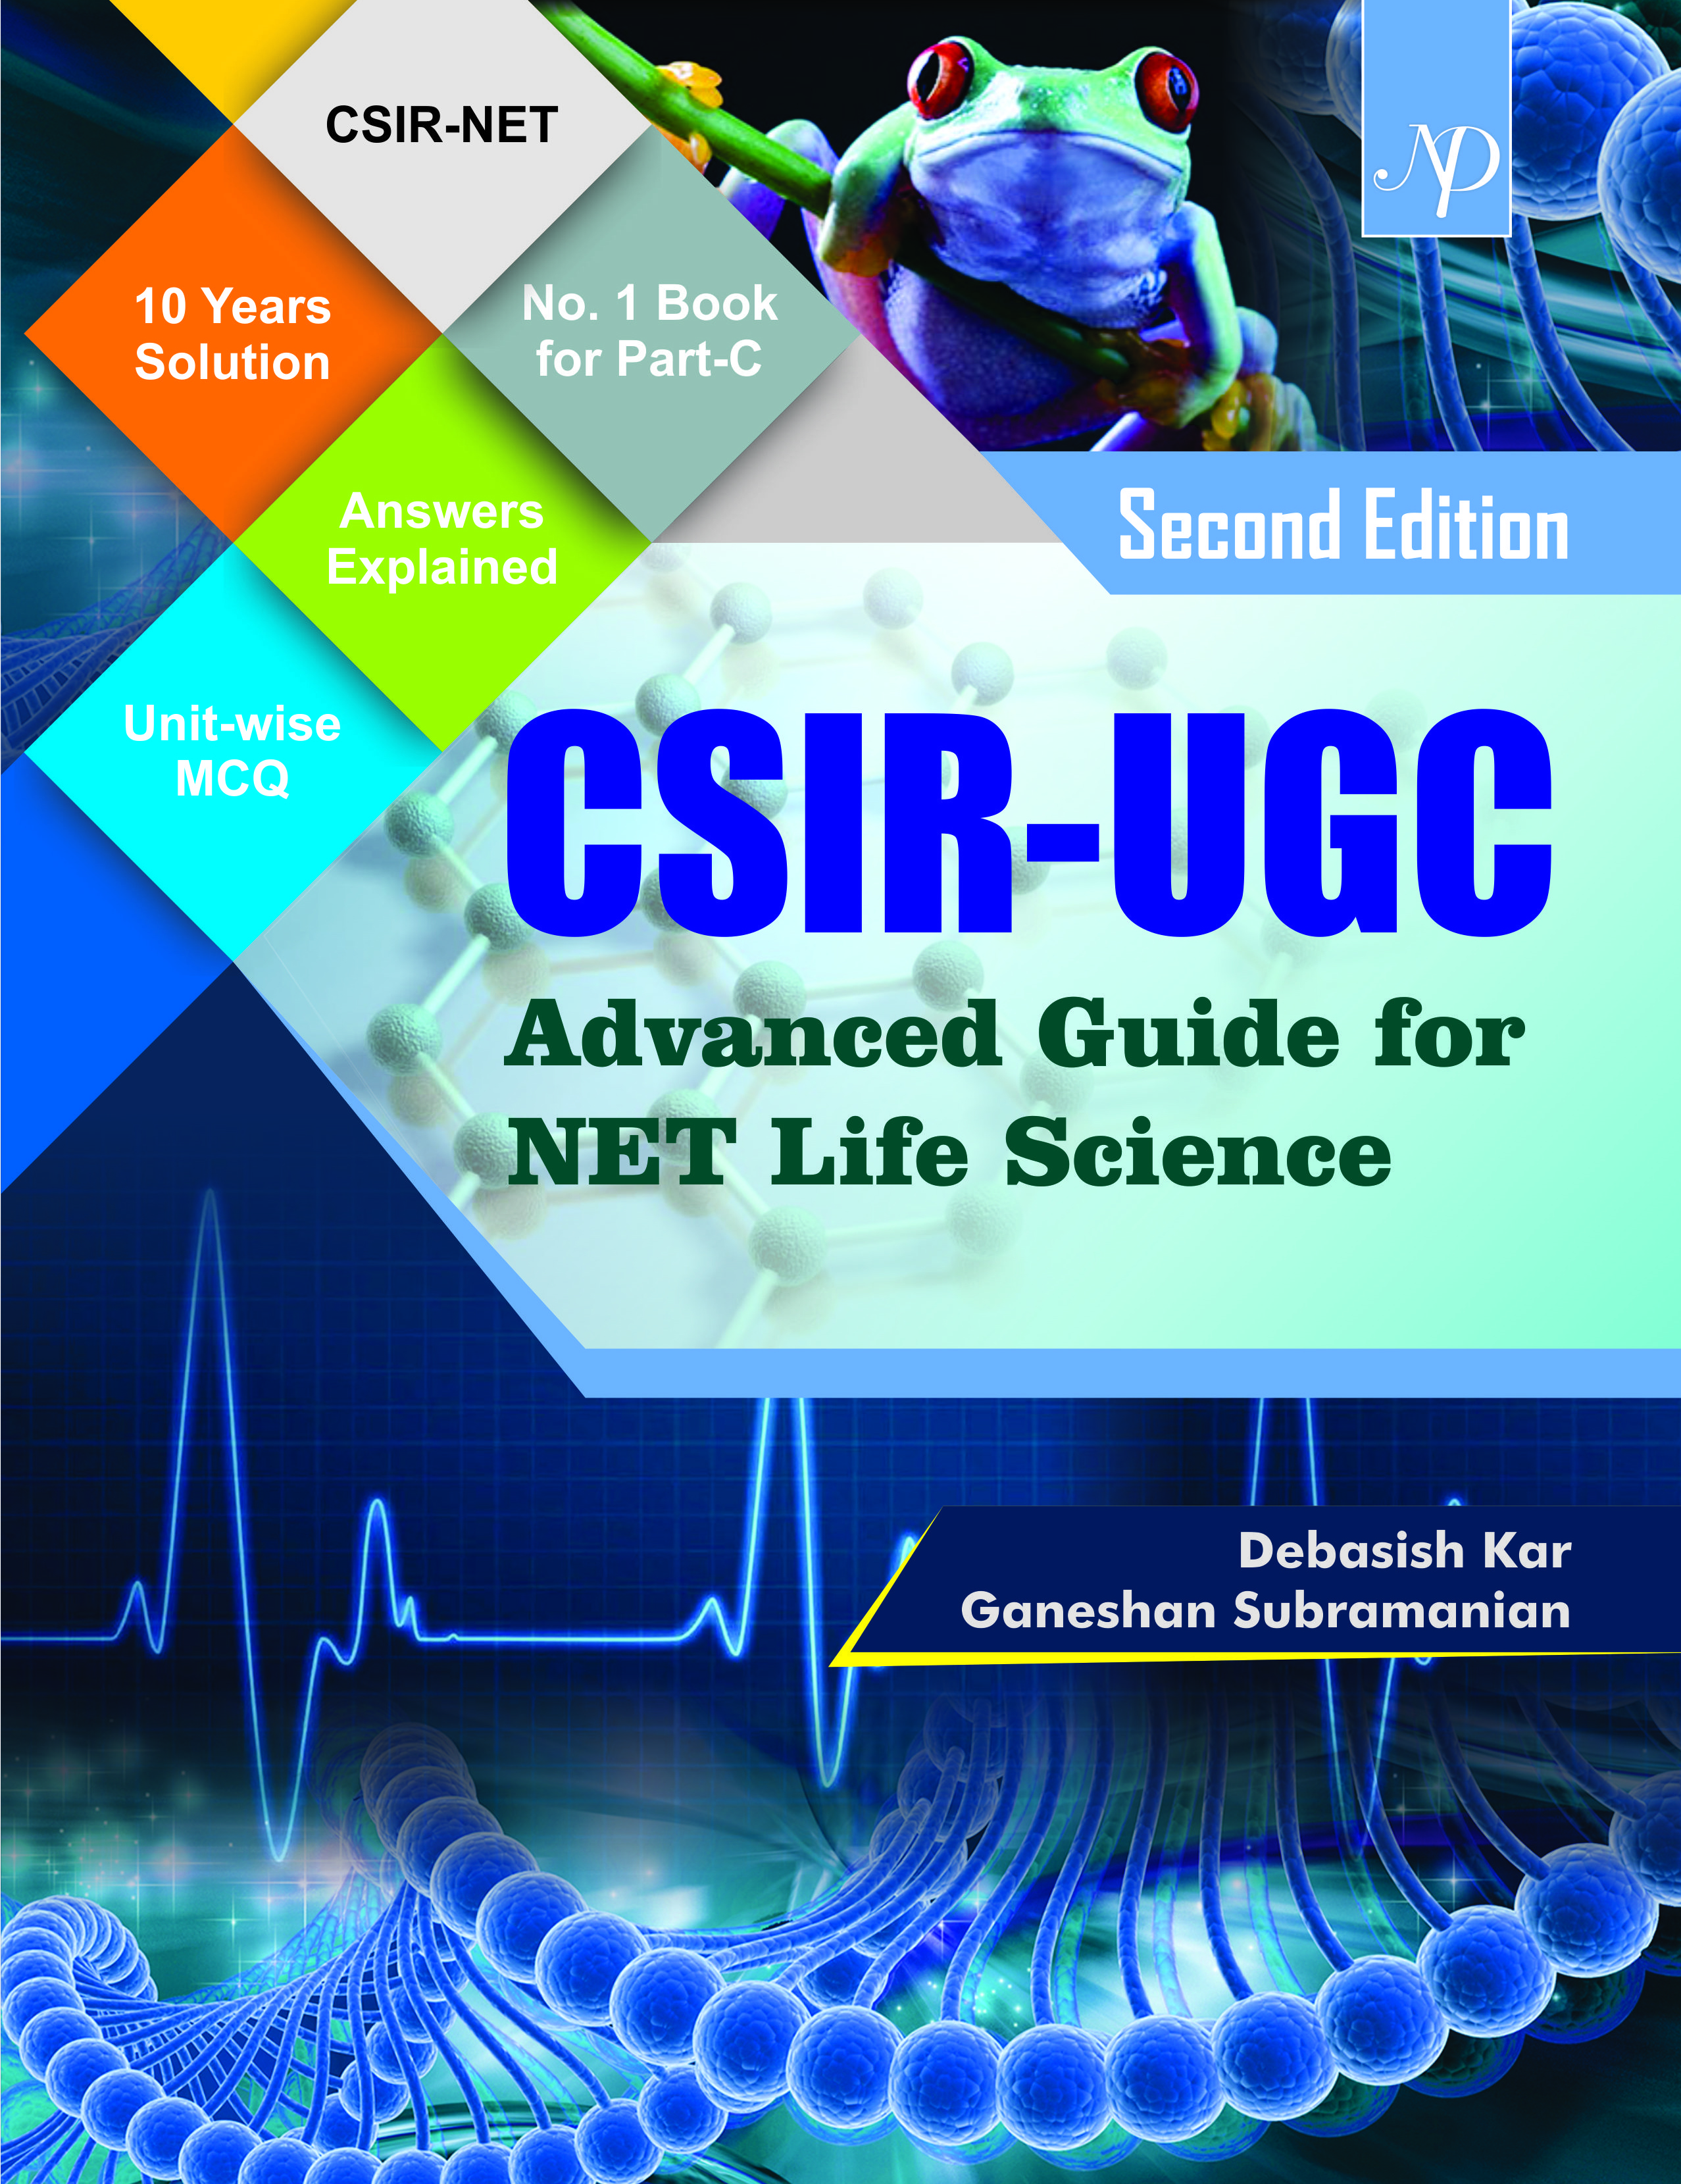 NEW DELHI PUBLISHERS - CSIR-UGC Advanced Guide for the NET Life Science 2nd  Edition